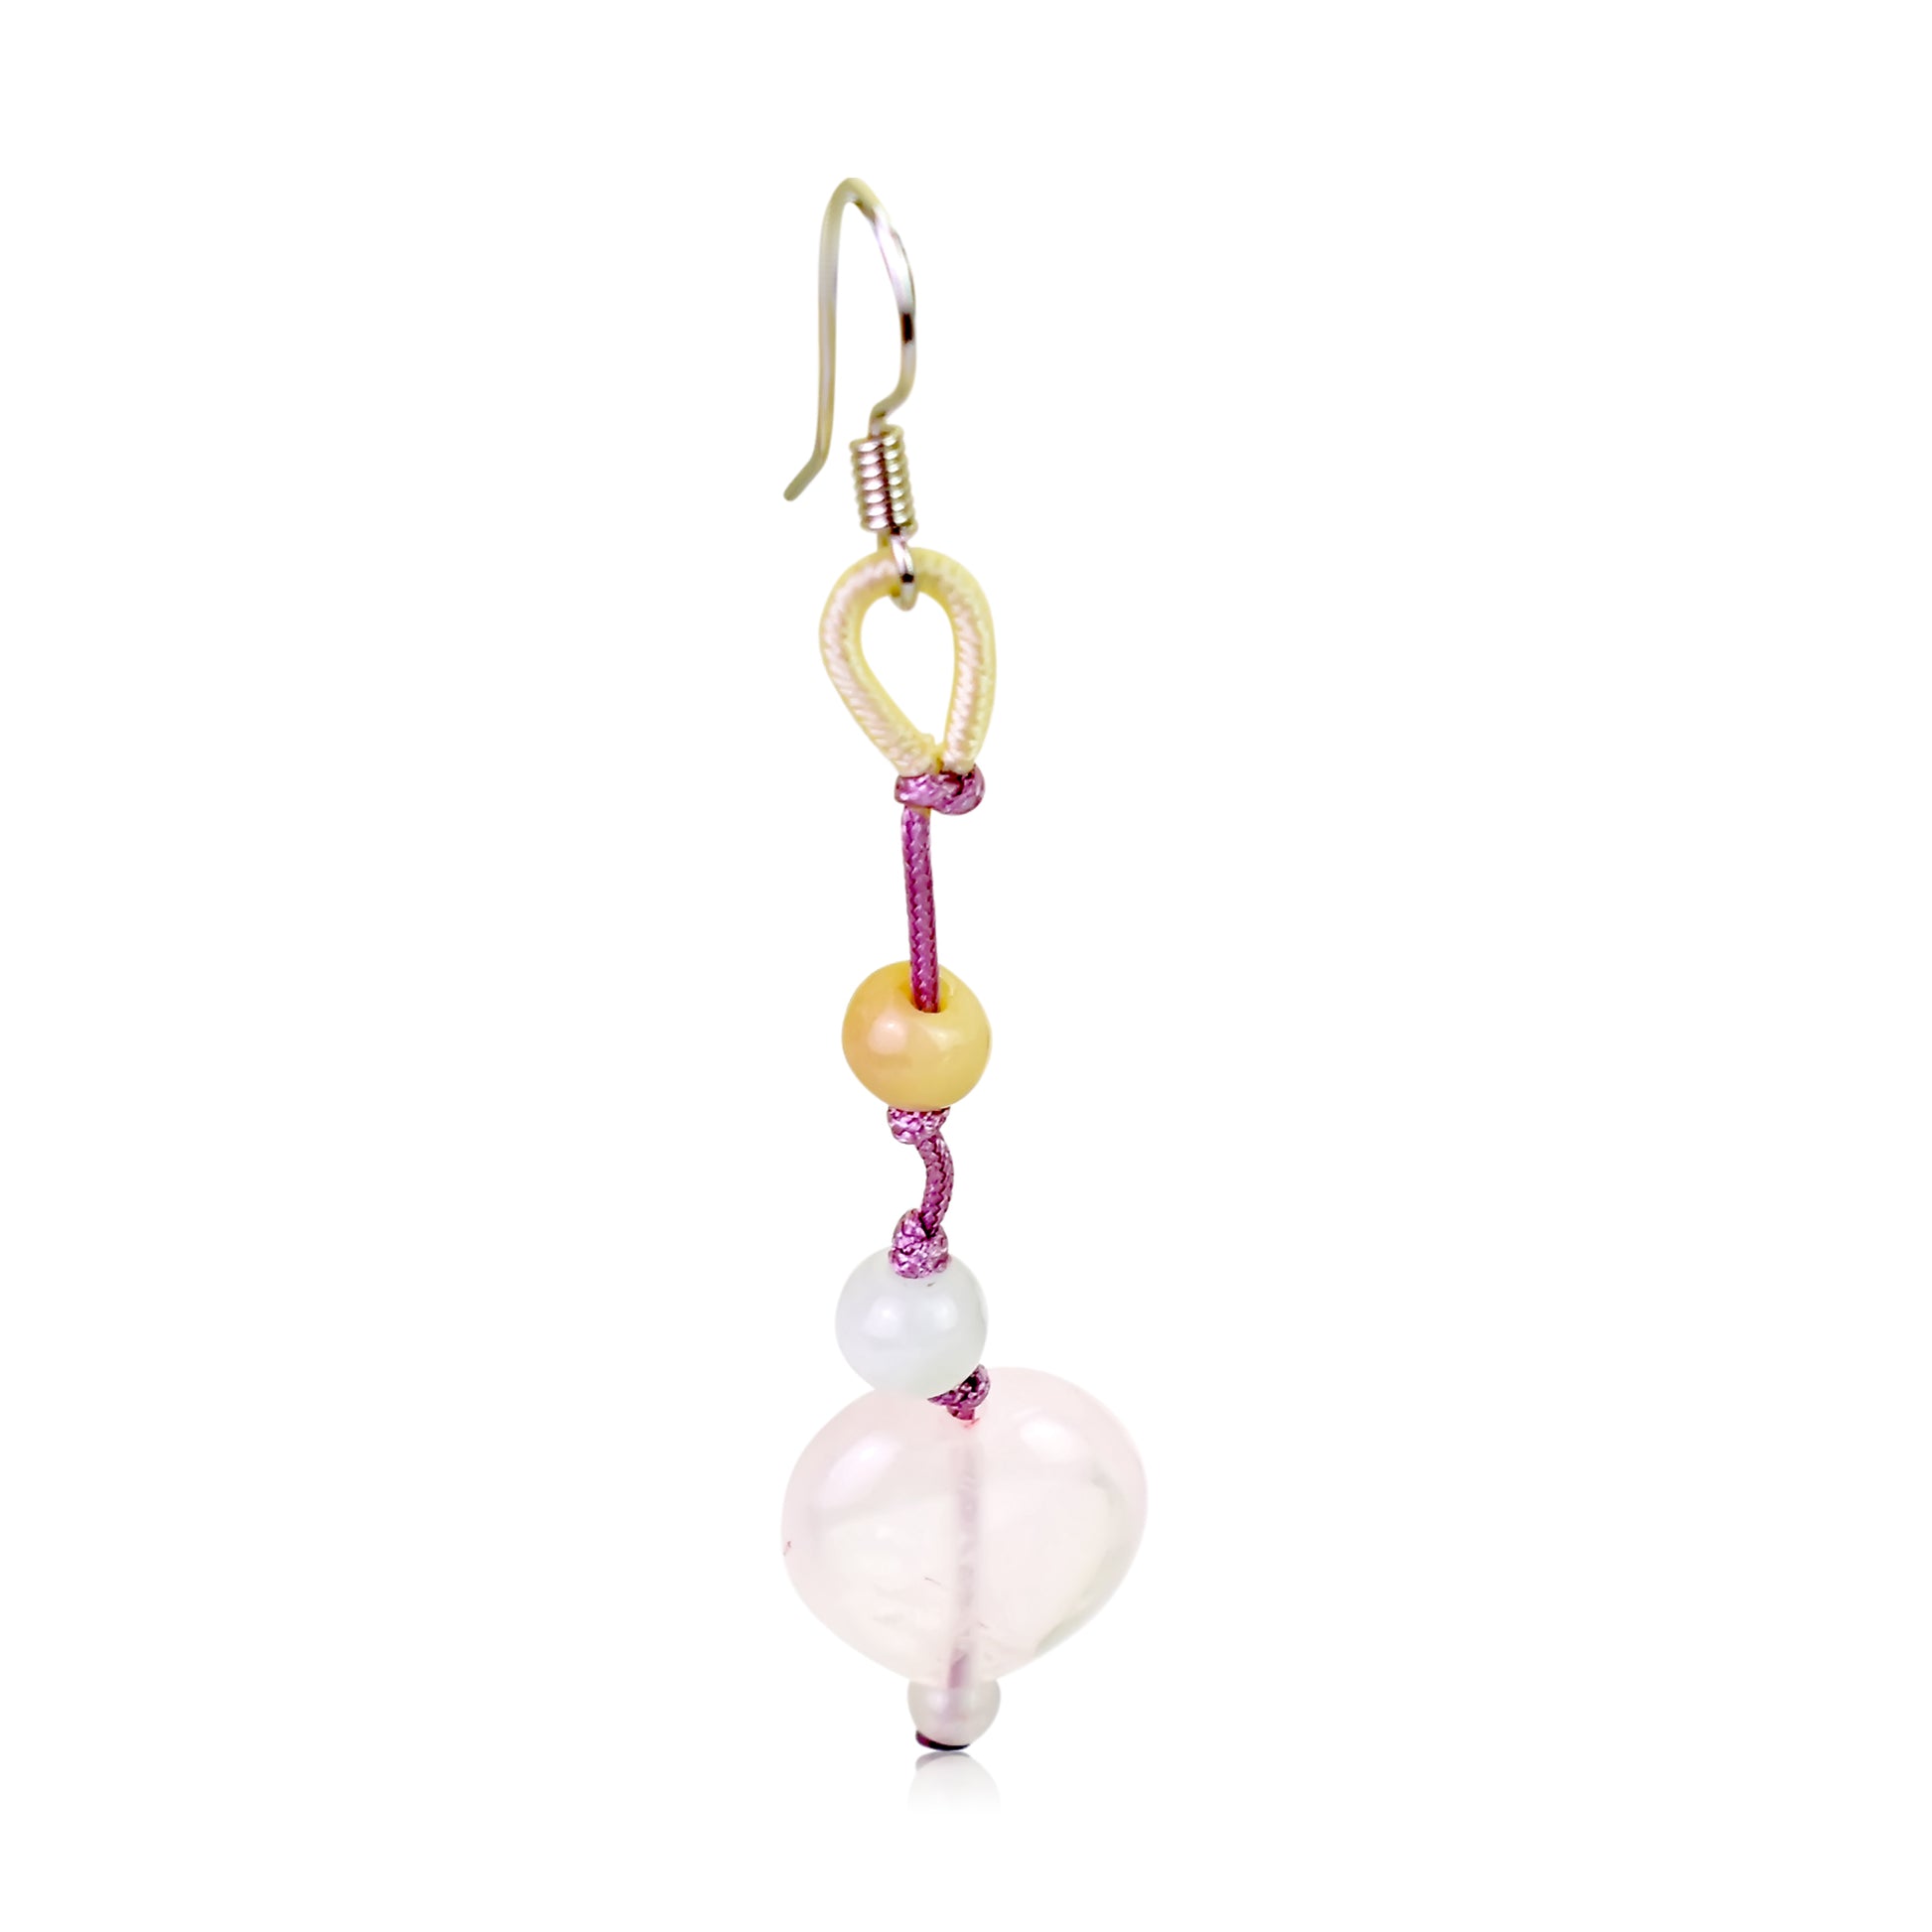 Get Ready to Shine with Rose Quartz Heart Earrings made with Lavender Cord